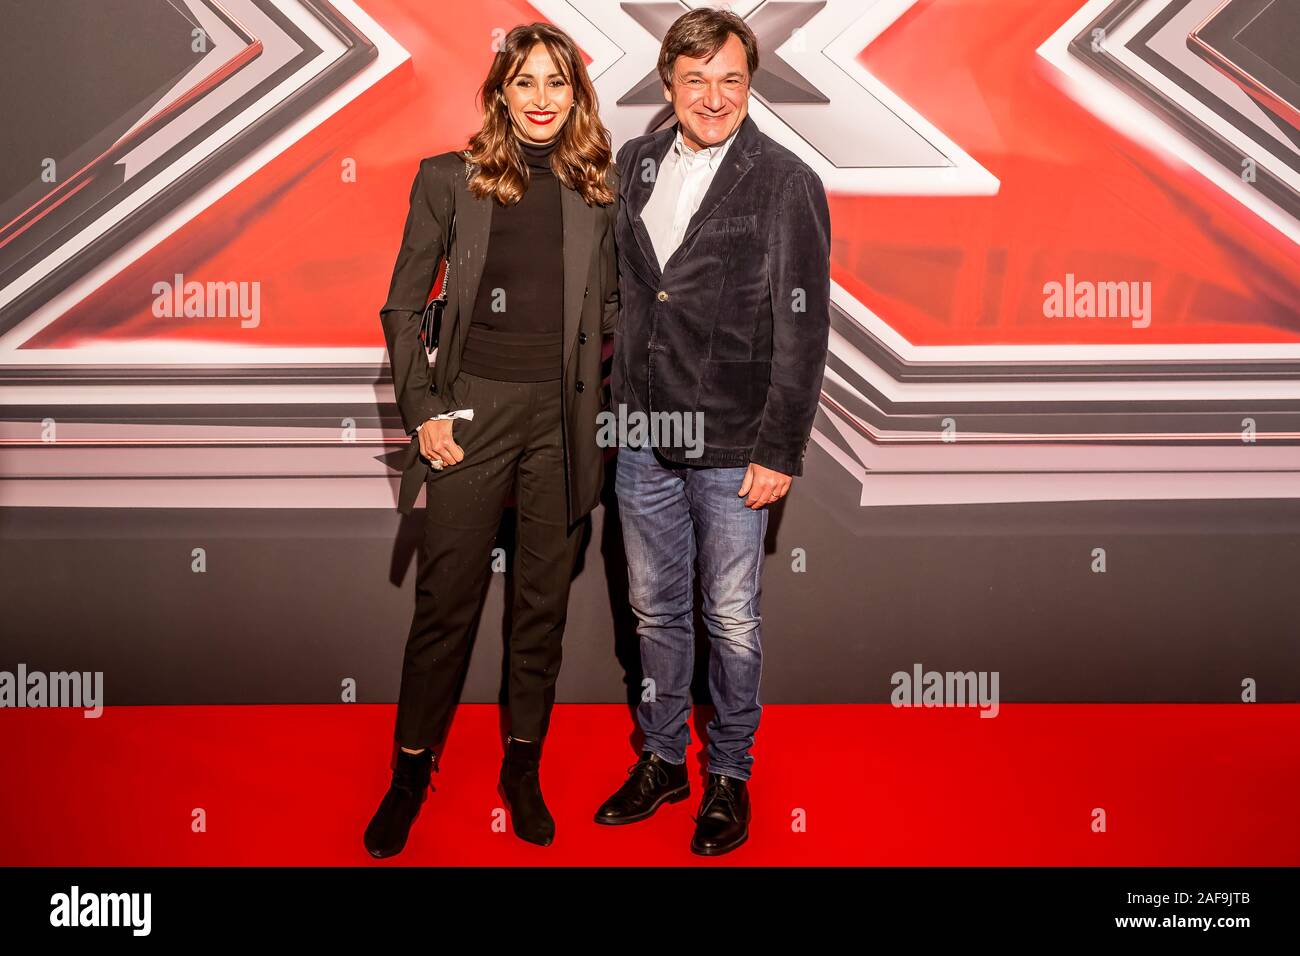 X Factor Tv Presenter High Resolution Stock Photography and Images - Alamy